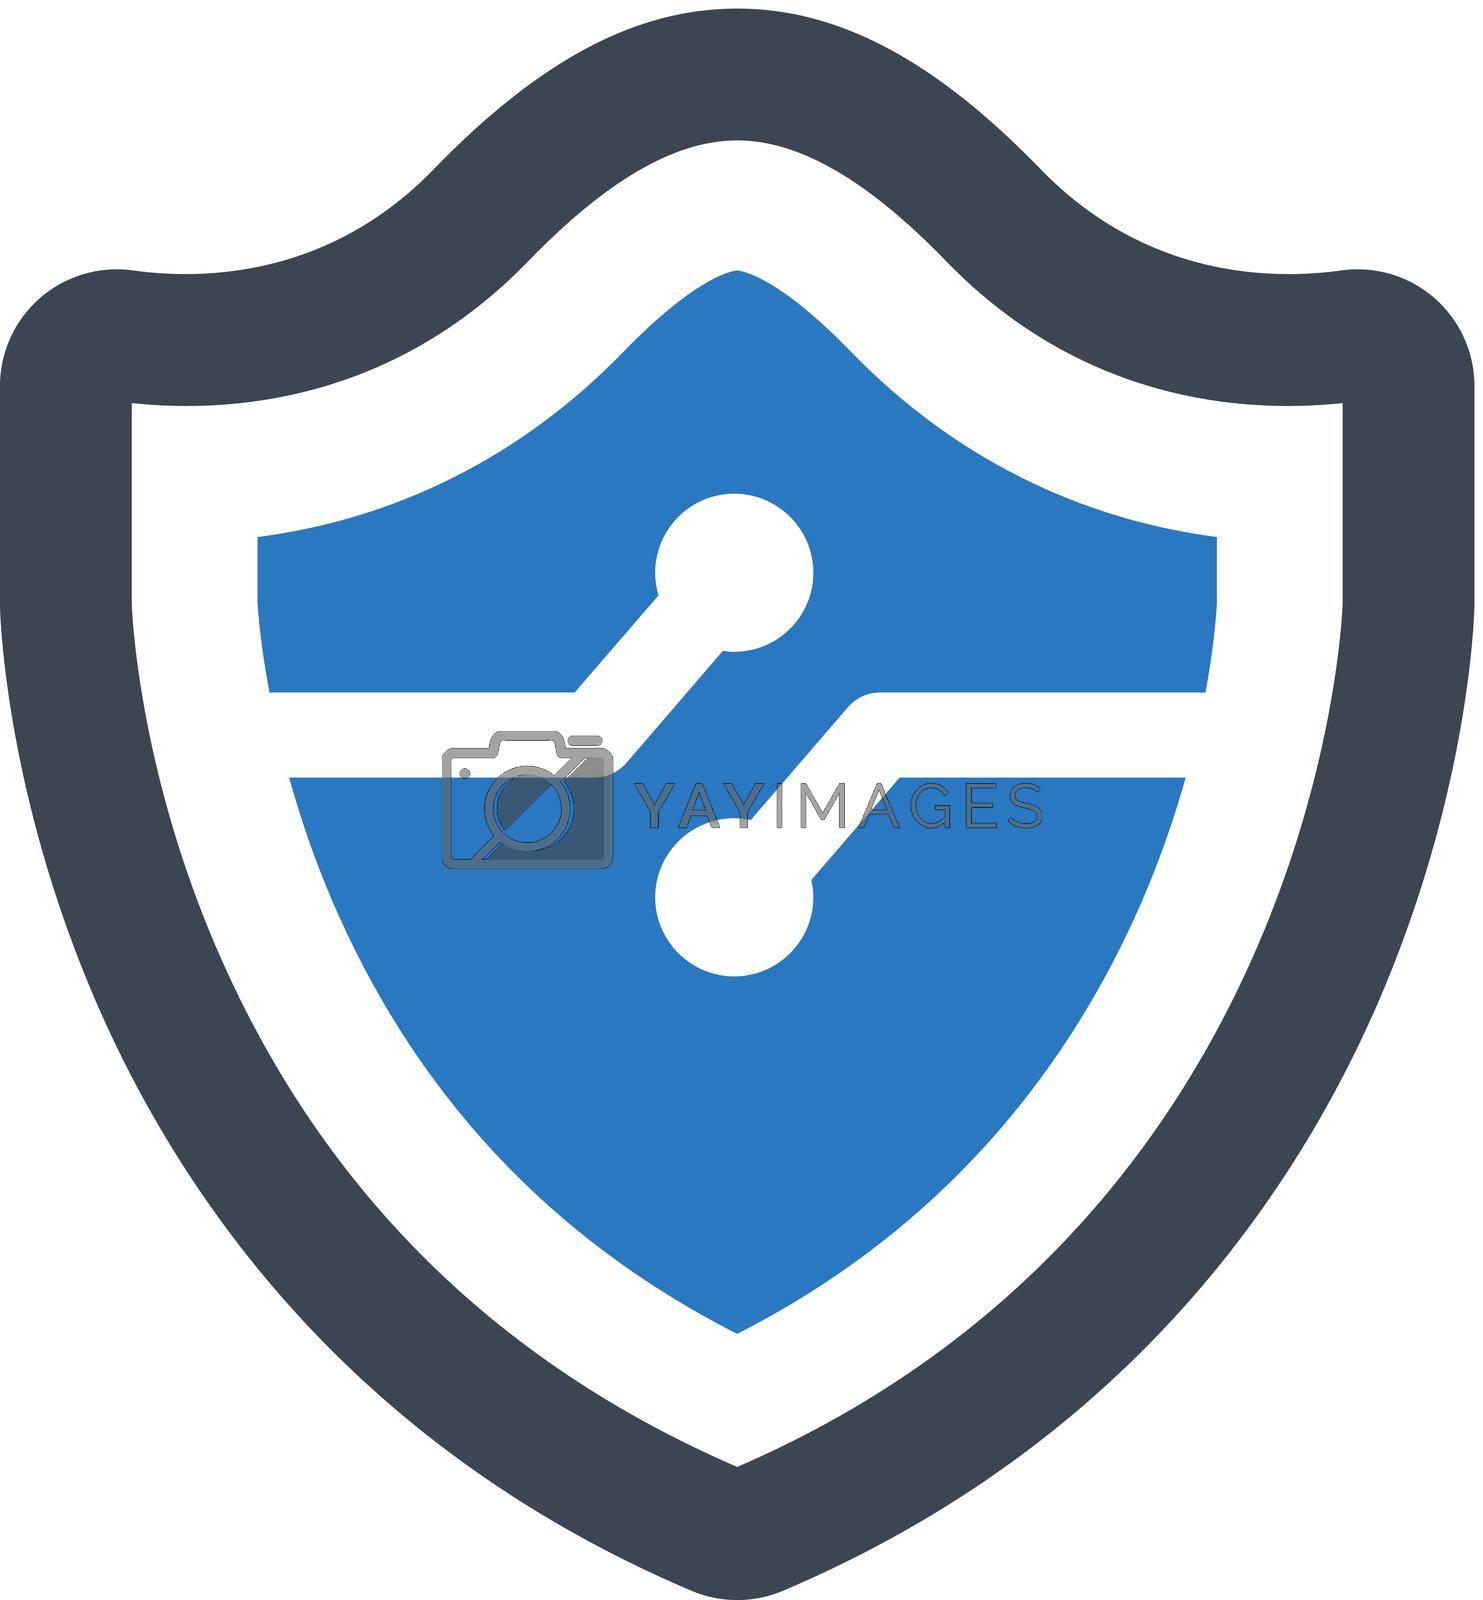 Secure information technology icon. Vector EPS file.